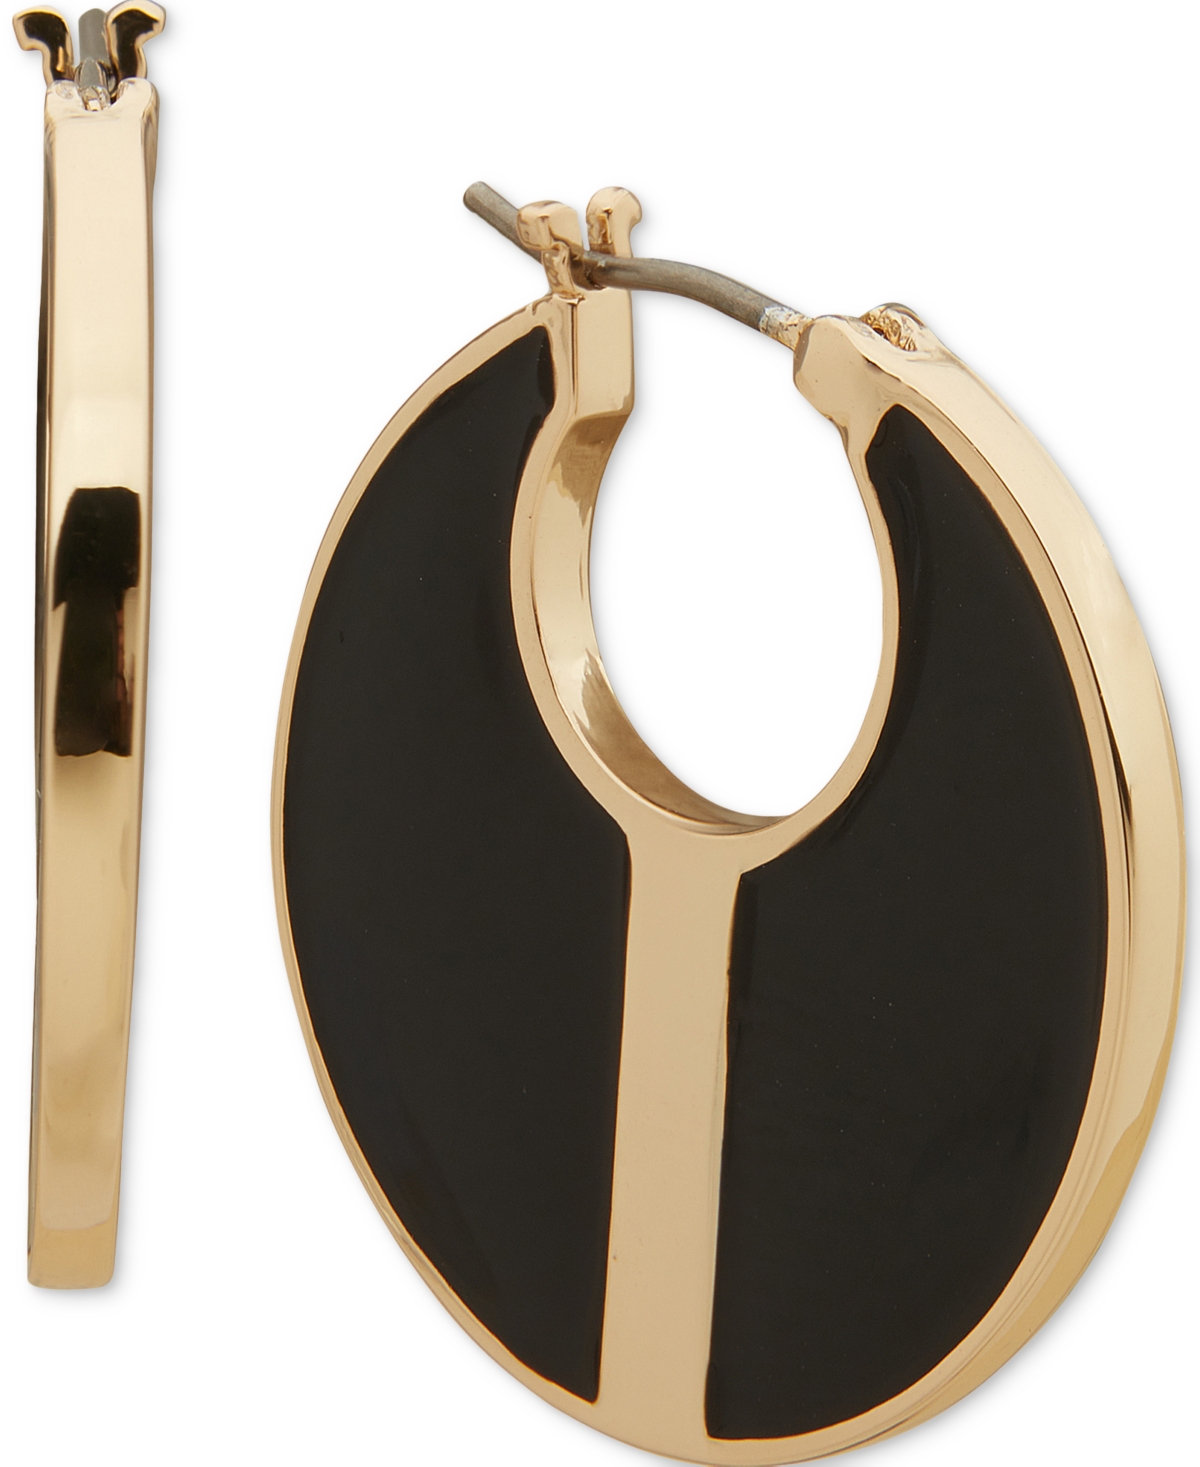 Dkny Gold-tone Extra-small Color Filled Hoop Earrings, 0.41"